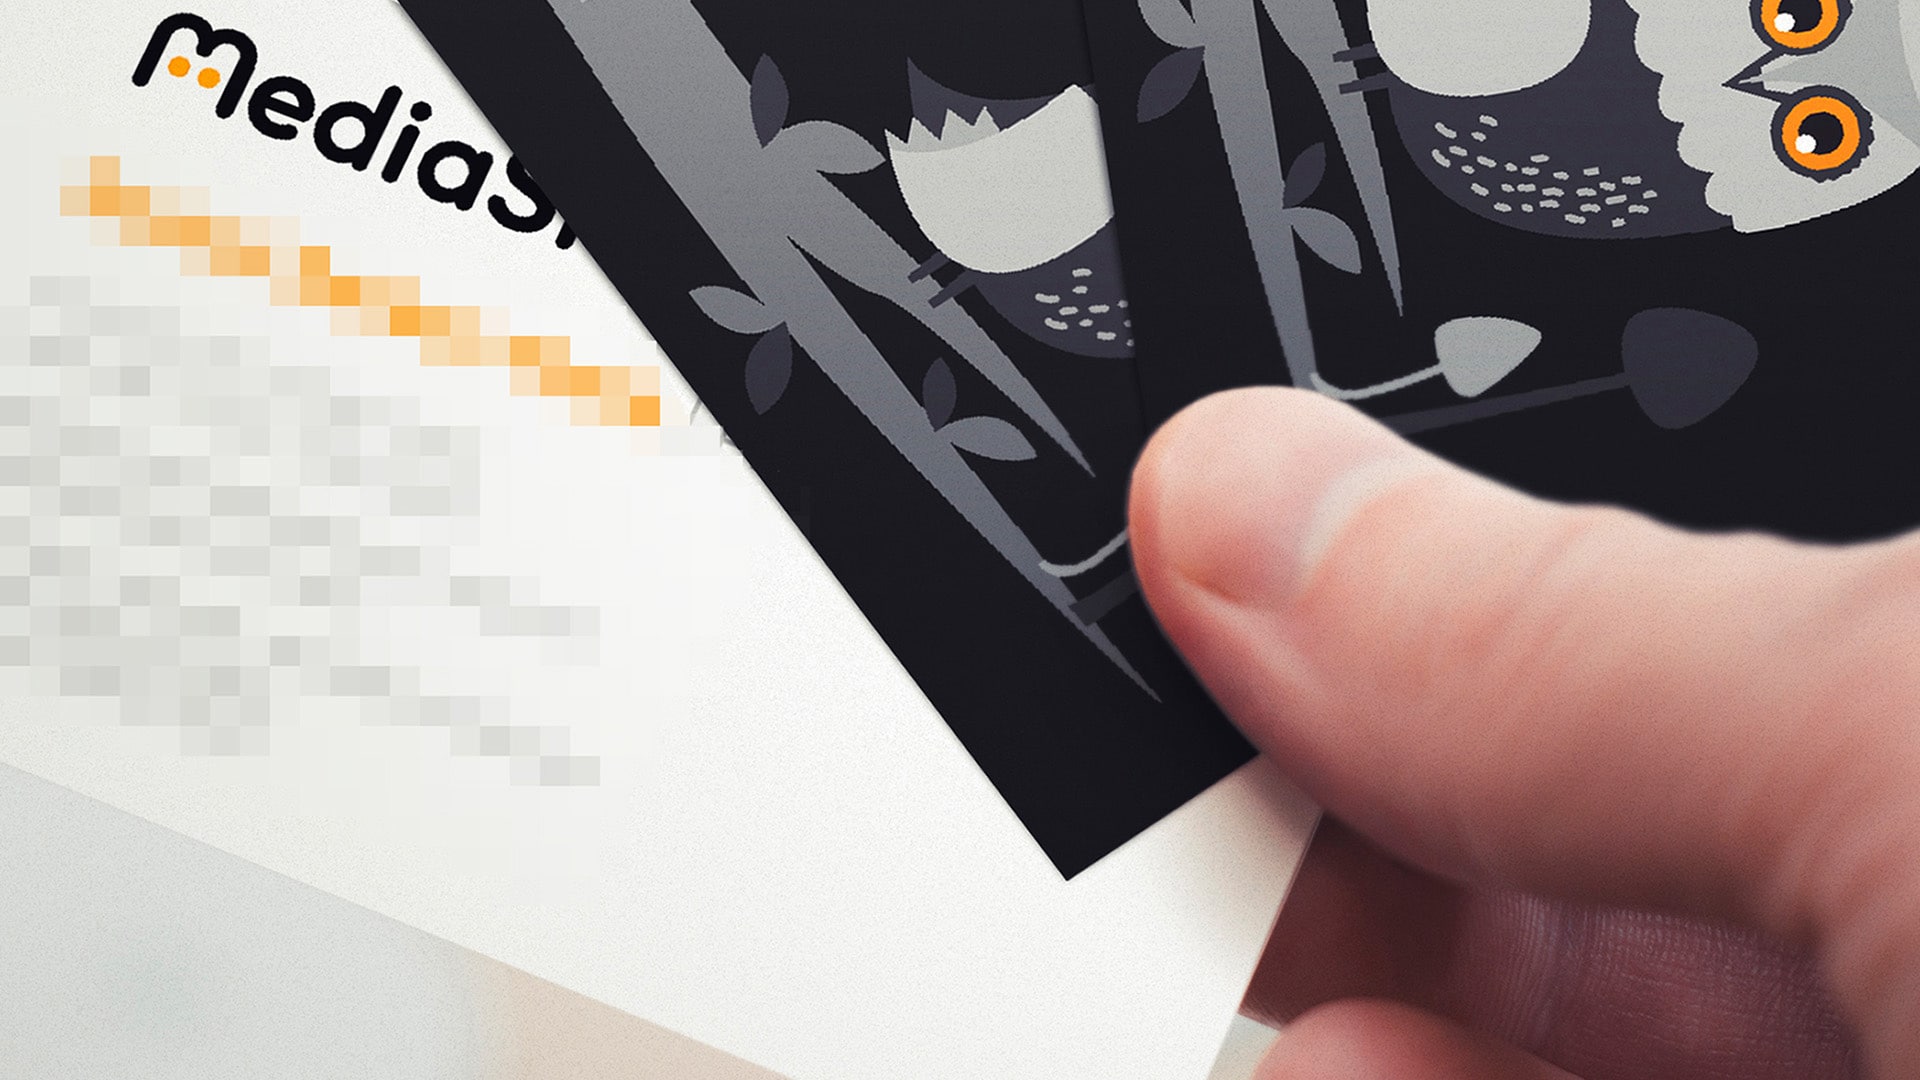 A close up image of two Media Smart business cards